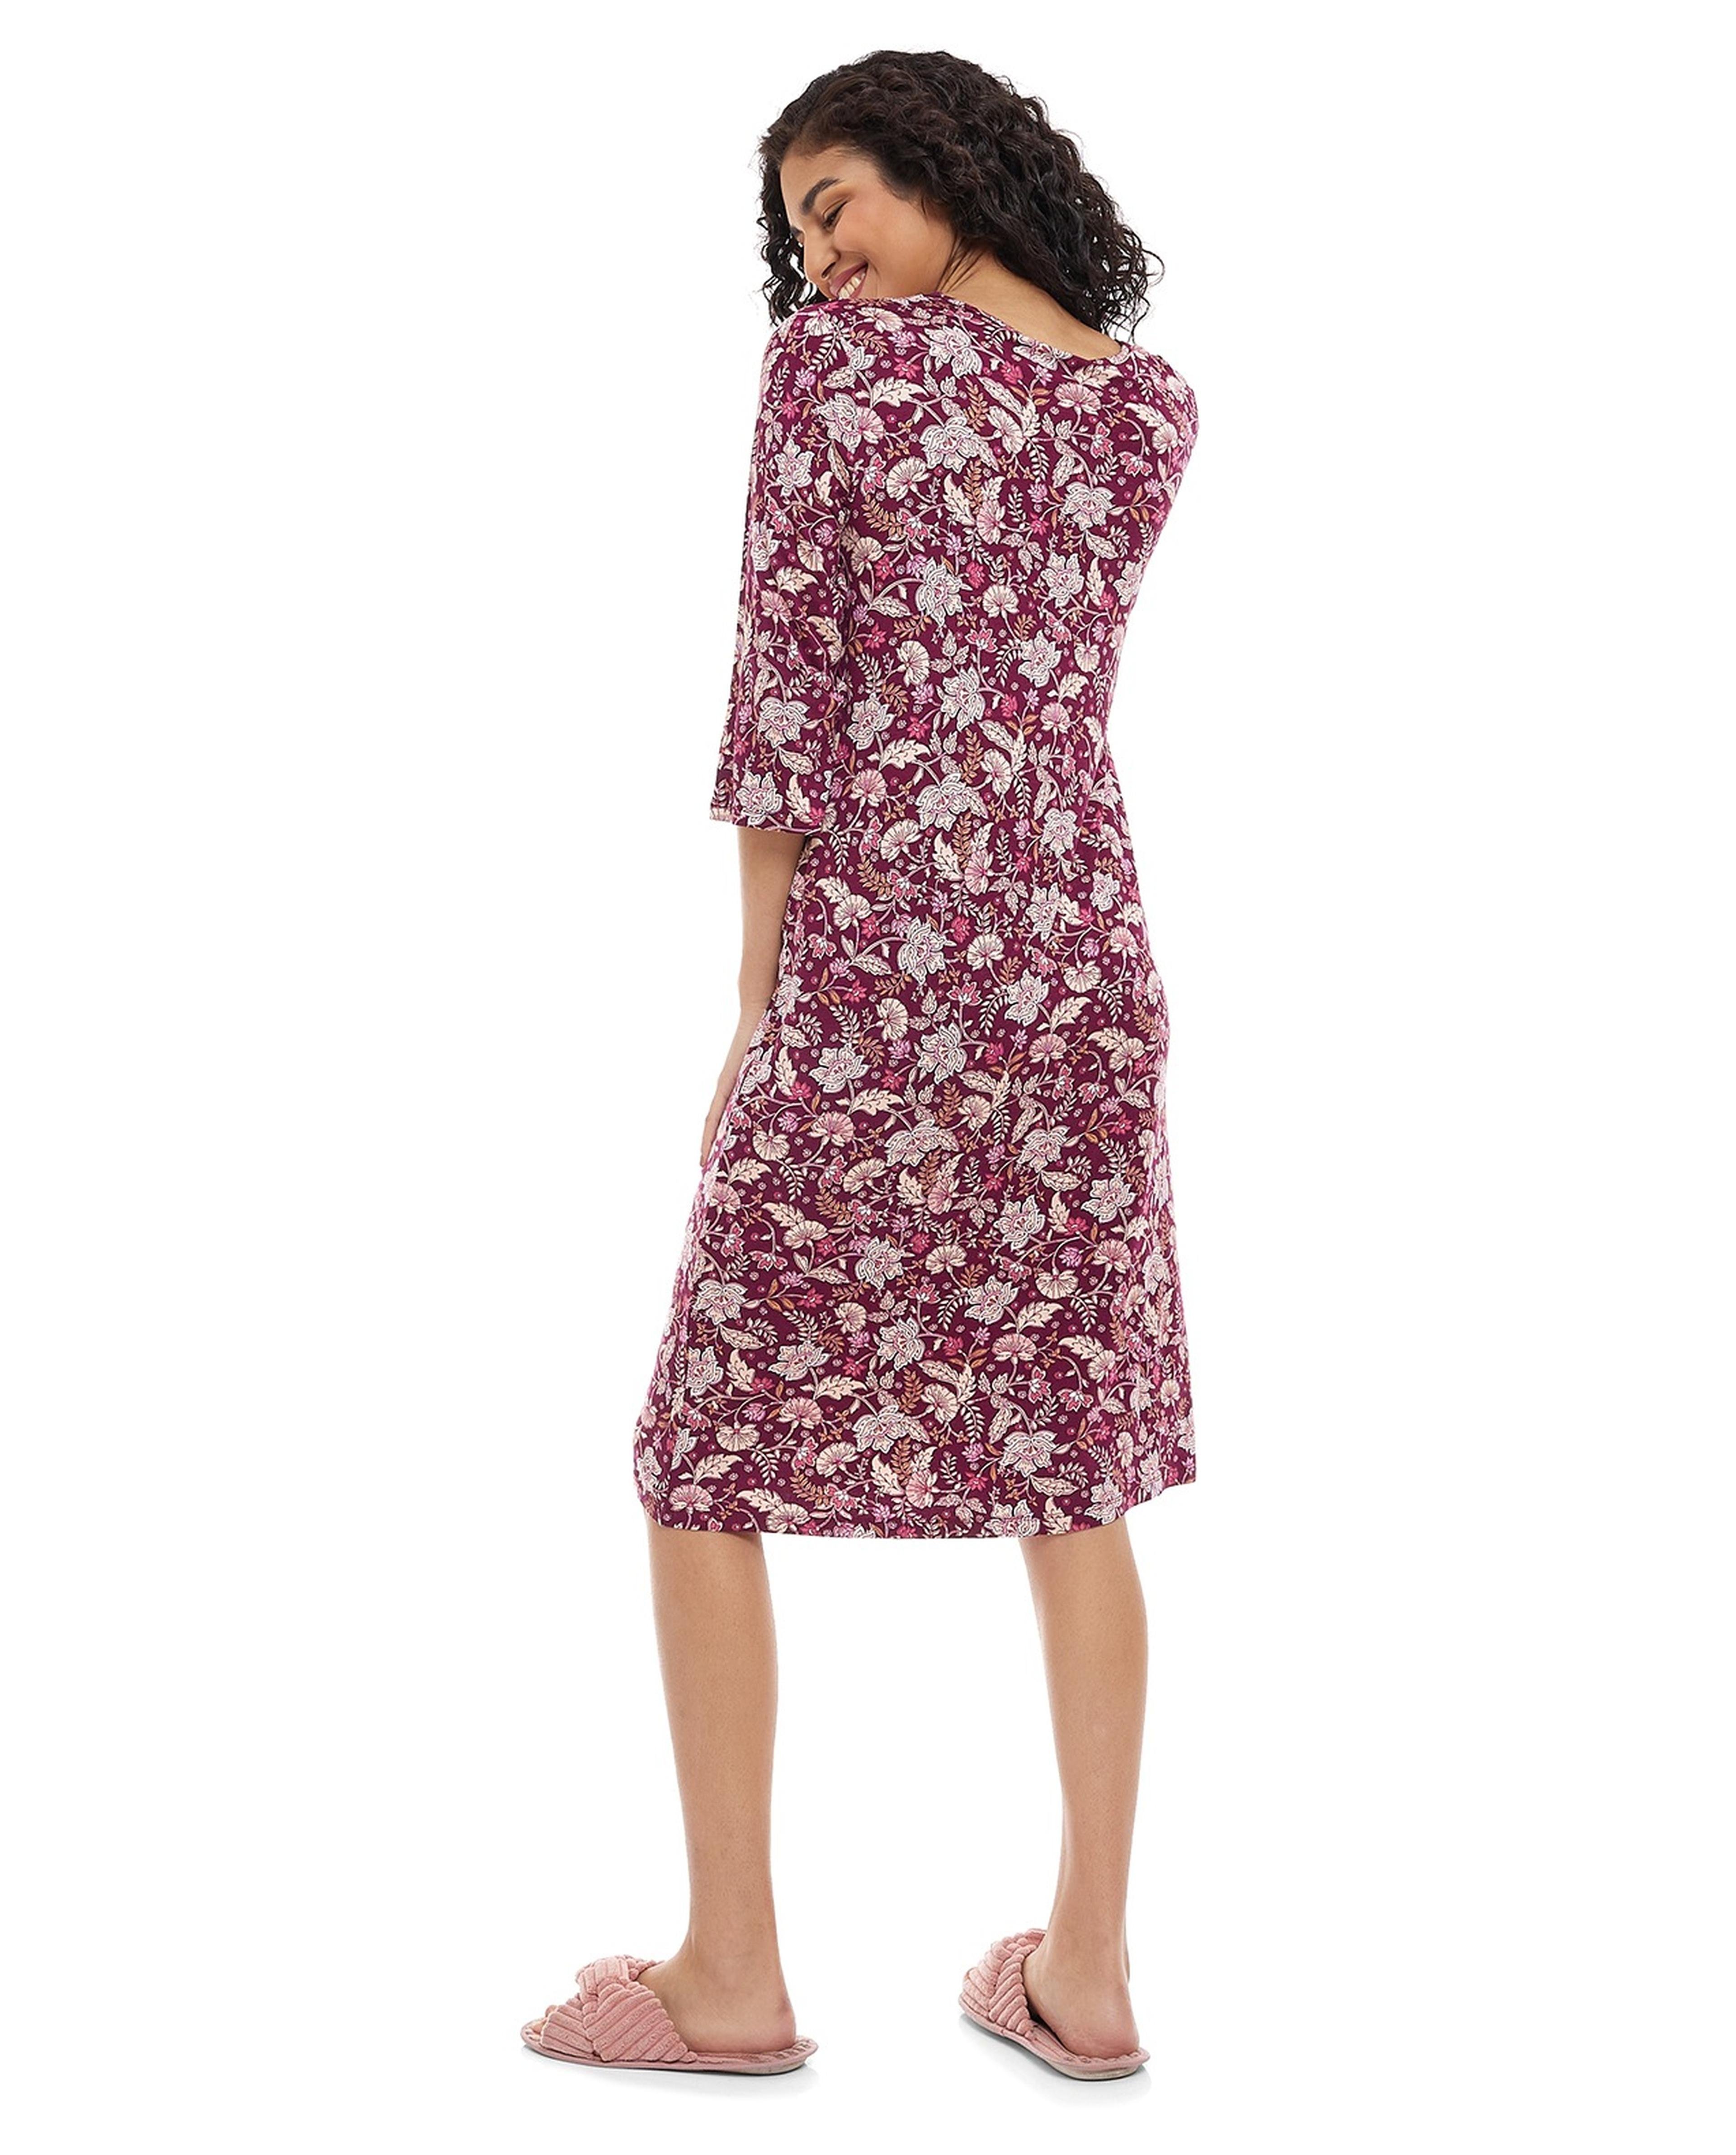 Floral Print Nightdress with 3/4 Sleeves